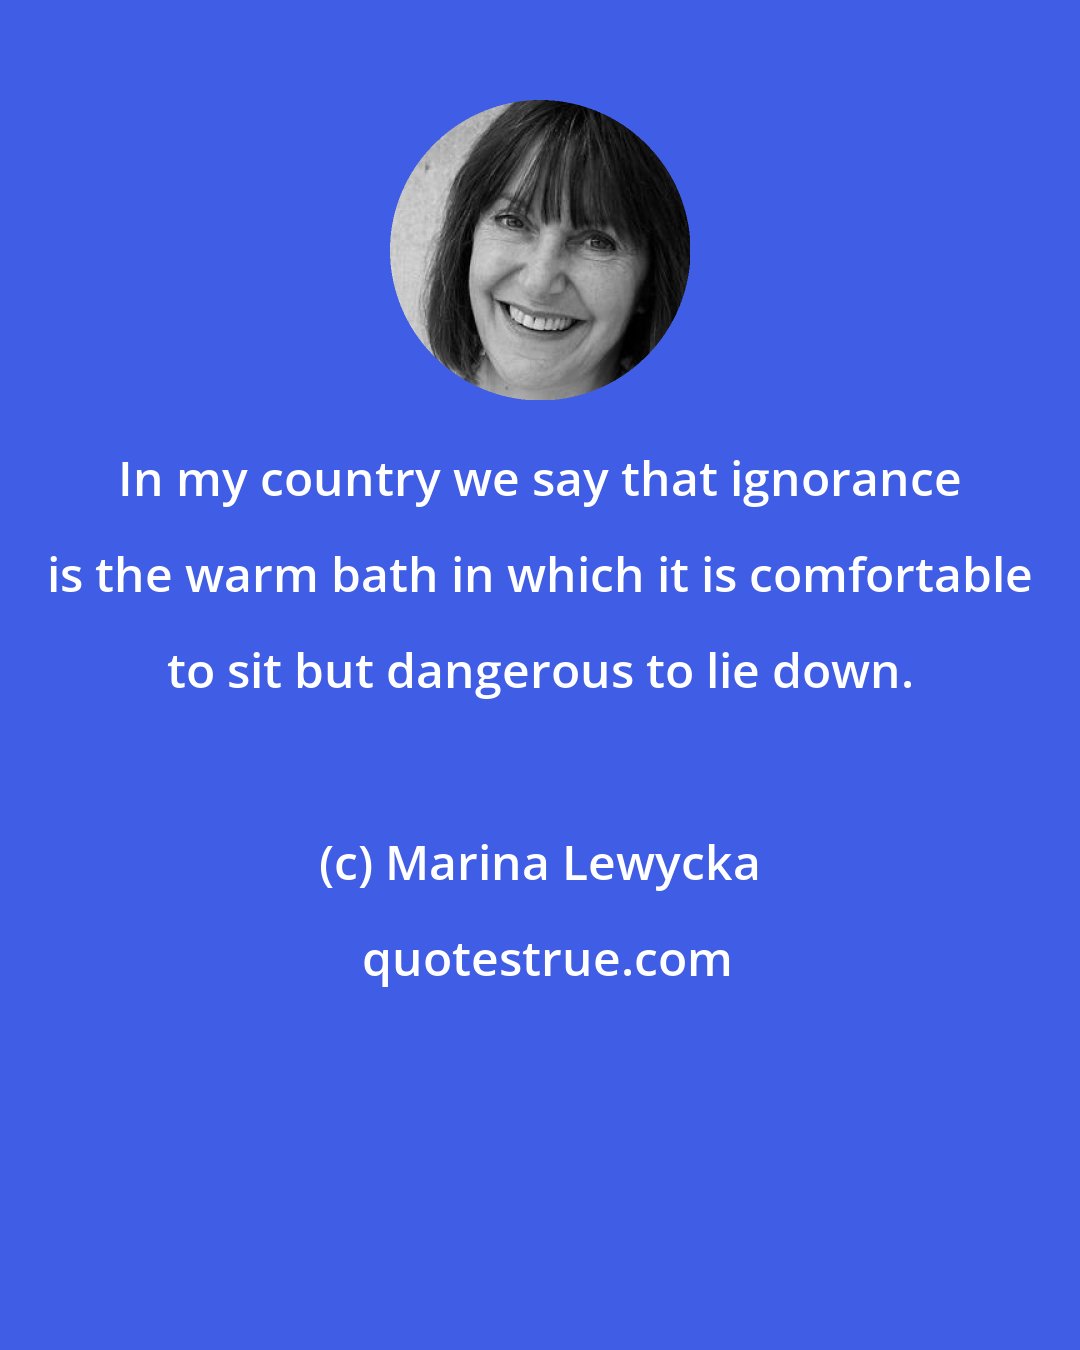 Marina Lewycka: In my country we say that ignorance is the warm bath in which it is comfortable to sit but dangerous to lie down.